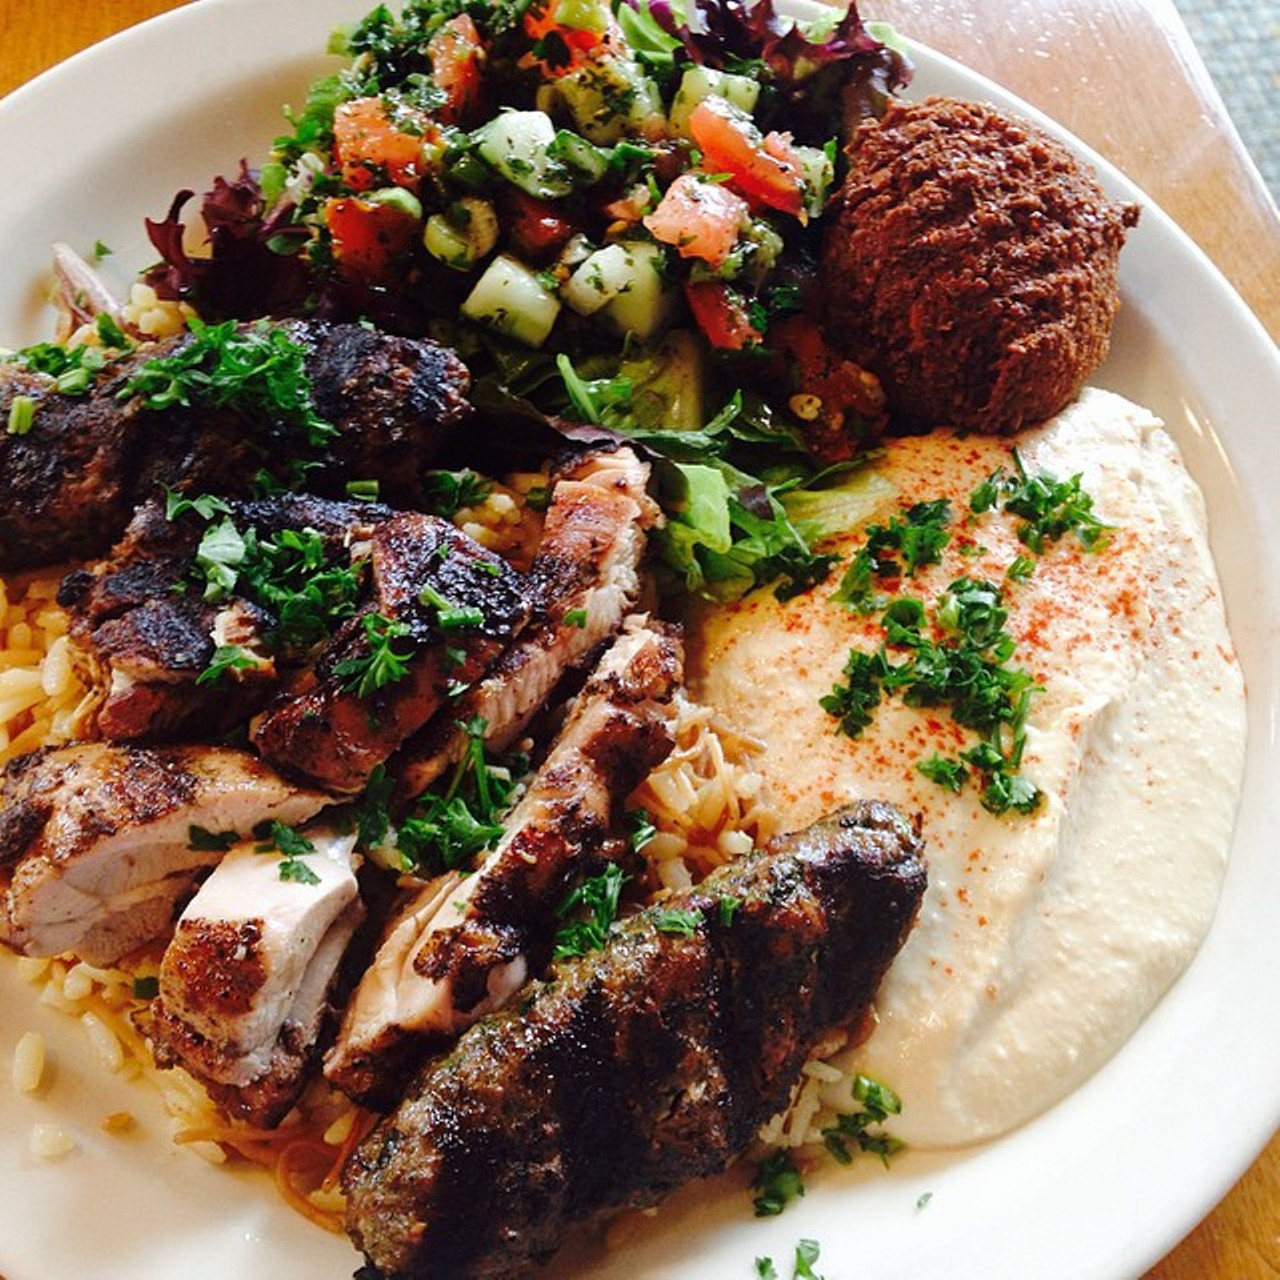 At Aladdin's, there's plenty of delicious middle eastern dishes that are under $10. Stop in at any of their locations across NEO.